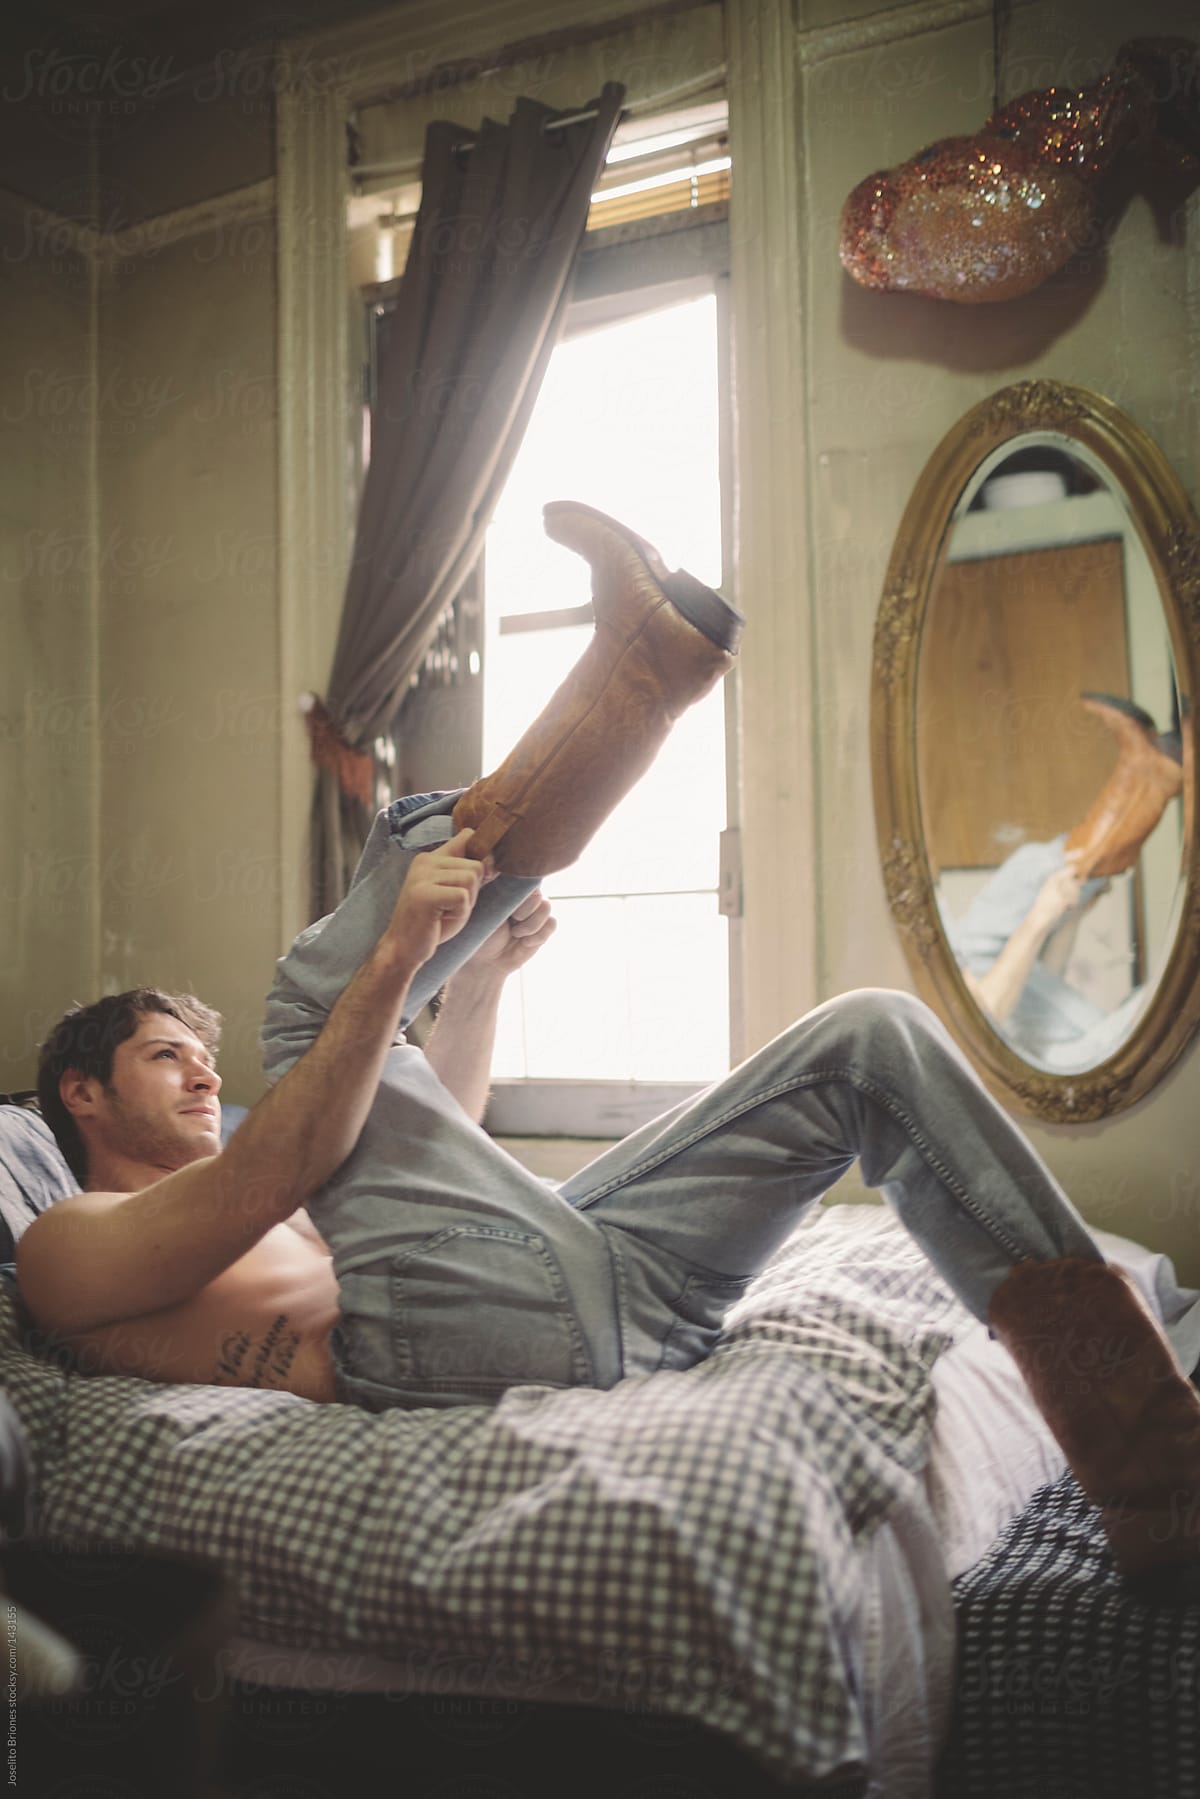 Shirtless Man in Jeans Struggling to Put Boots on in Bed